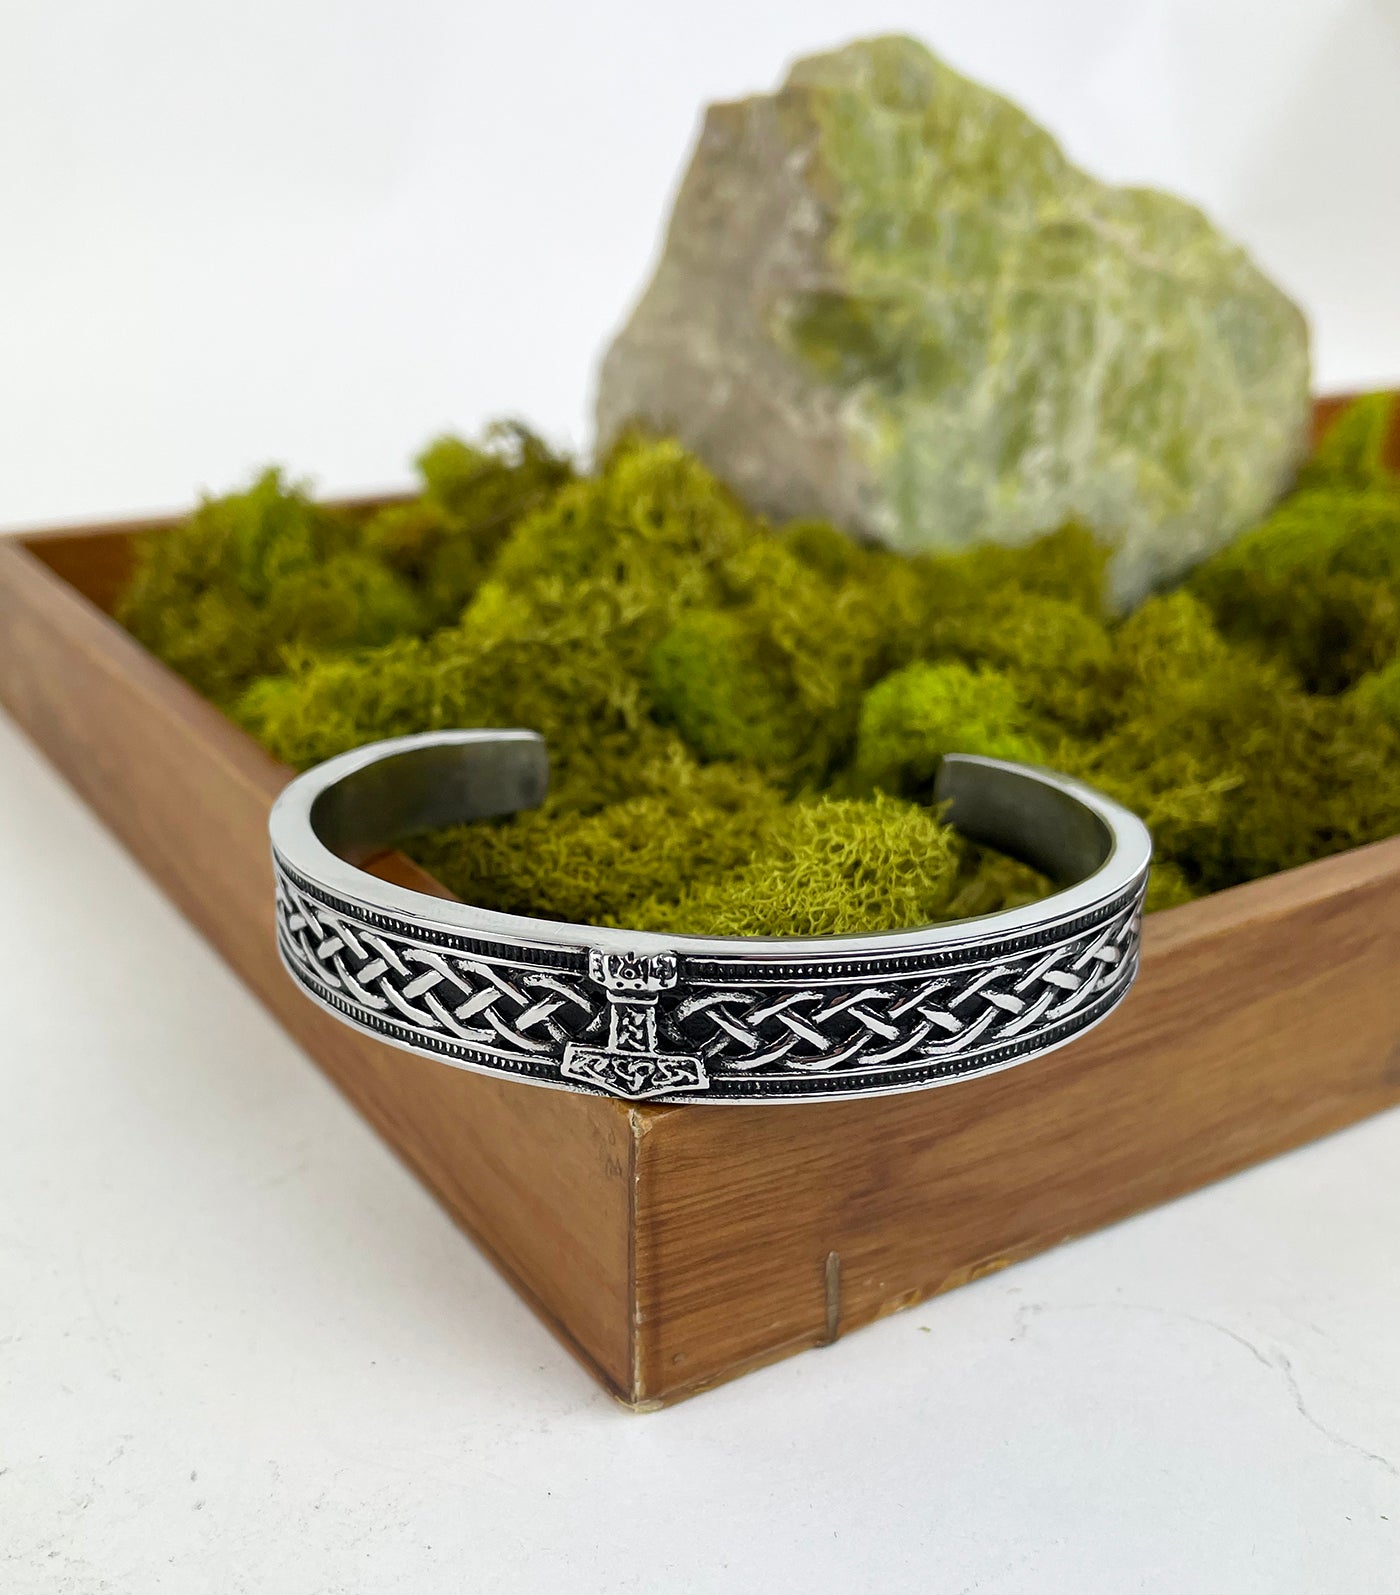 Men's Stainless Steel Cuff Bracelet with Thor's Hammer and Celtic Knot details